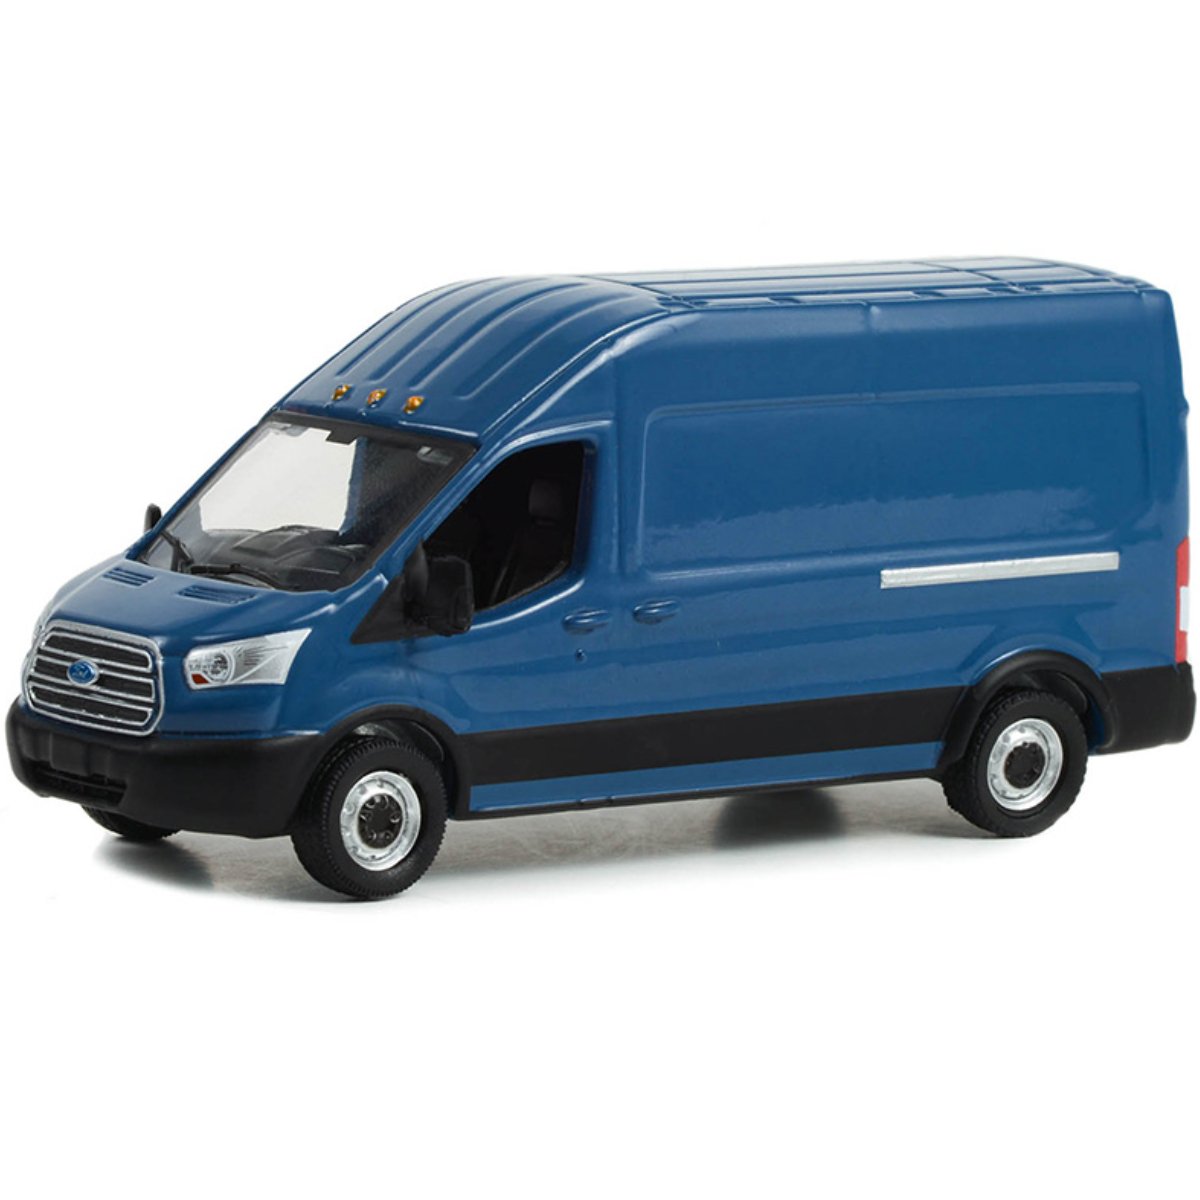 Greenlight 2017 Ford Transit LWN High Roof Dark Blue - 1:64 Scale - Phillips Hobbies